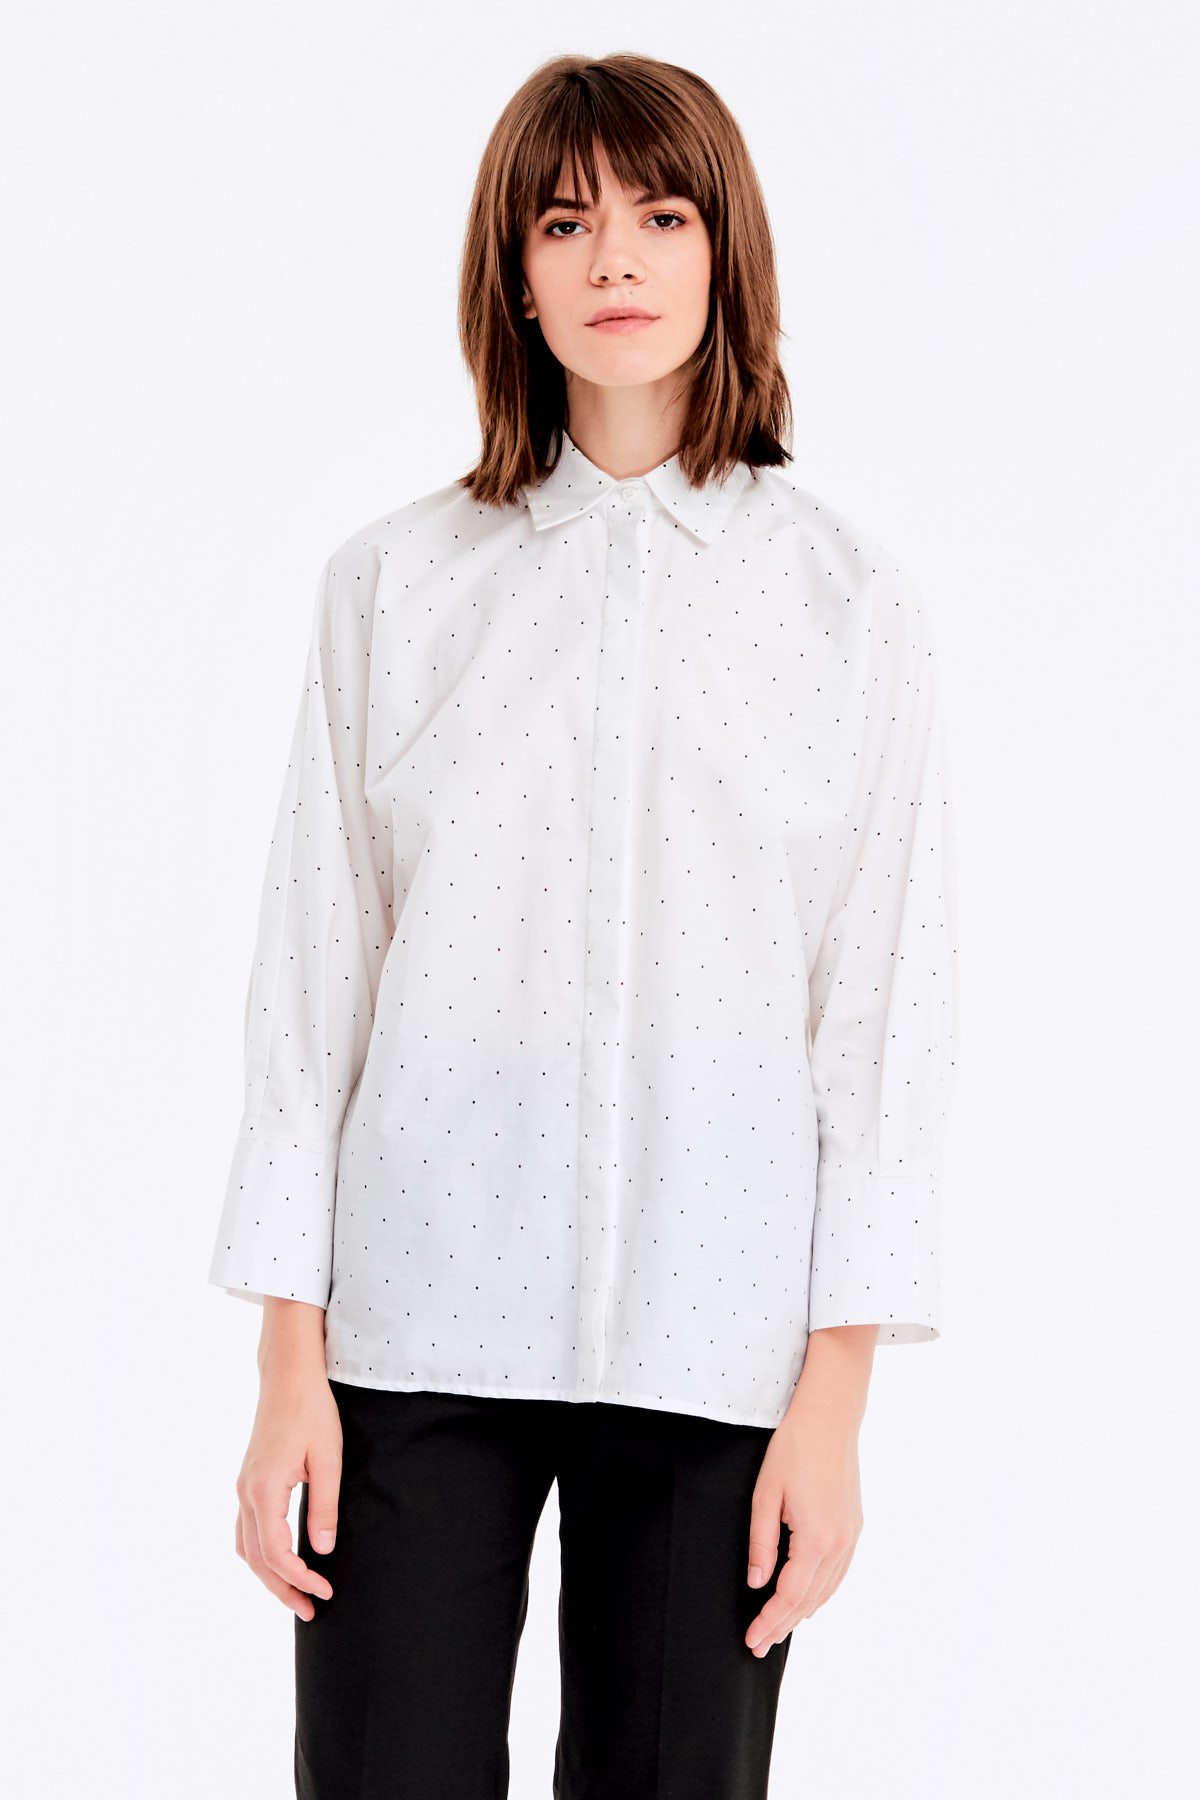 Loose-fitting white shirt with a black polka dot print and a concealed placket, photo 2